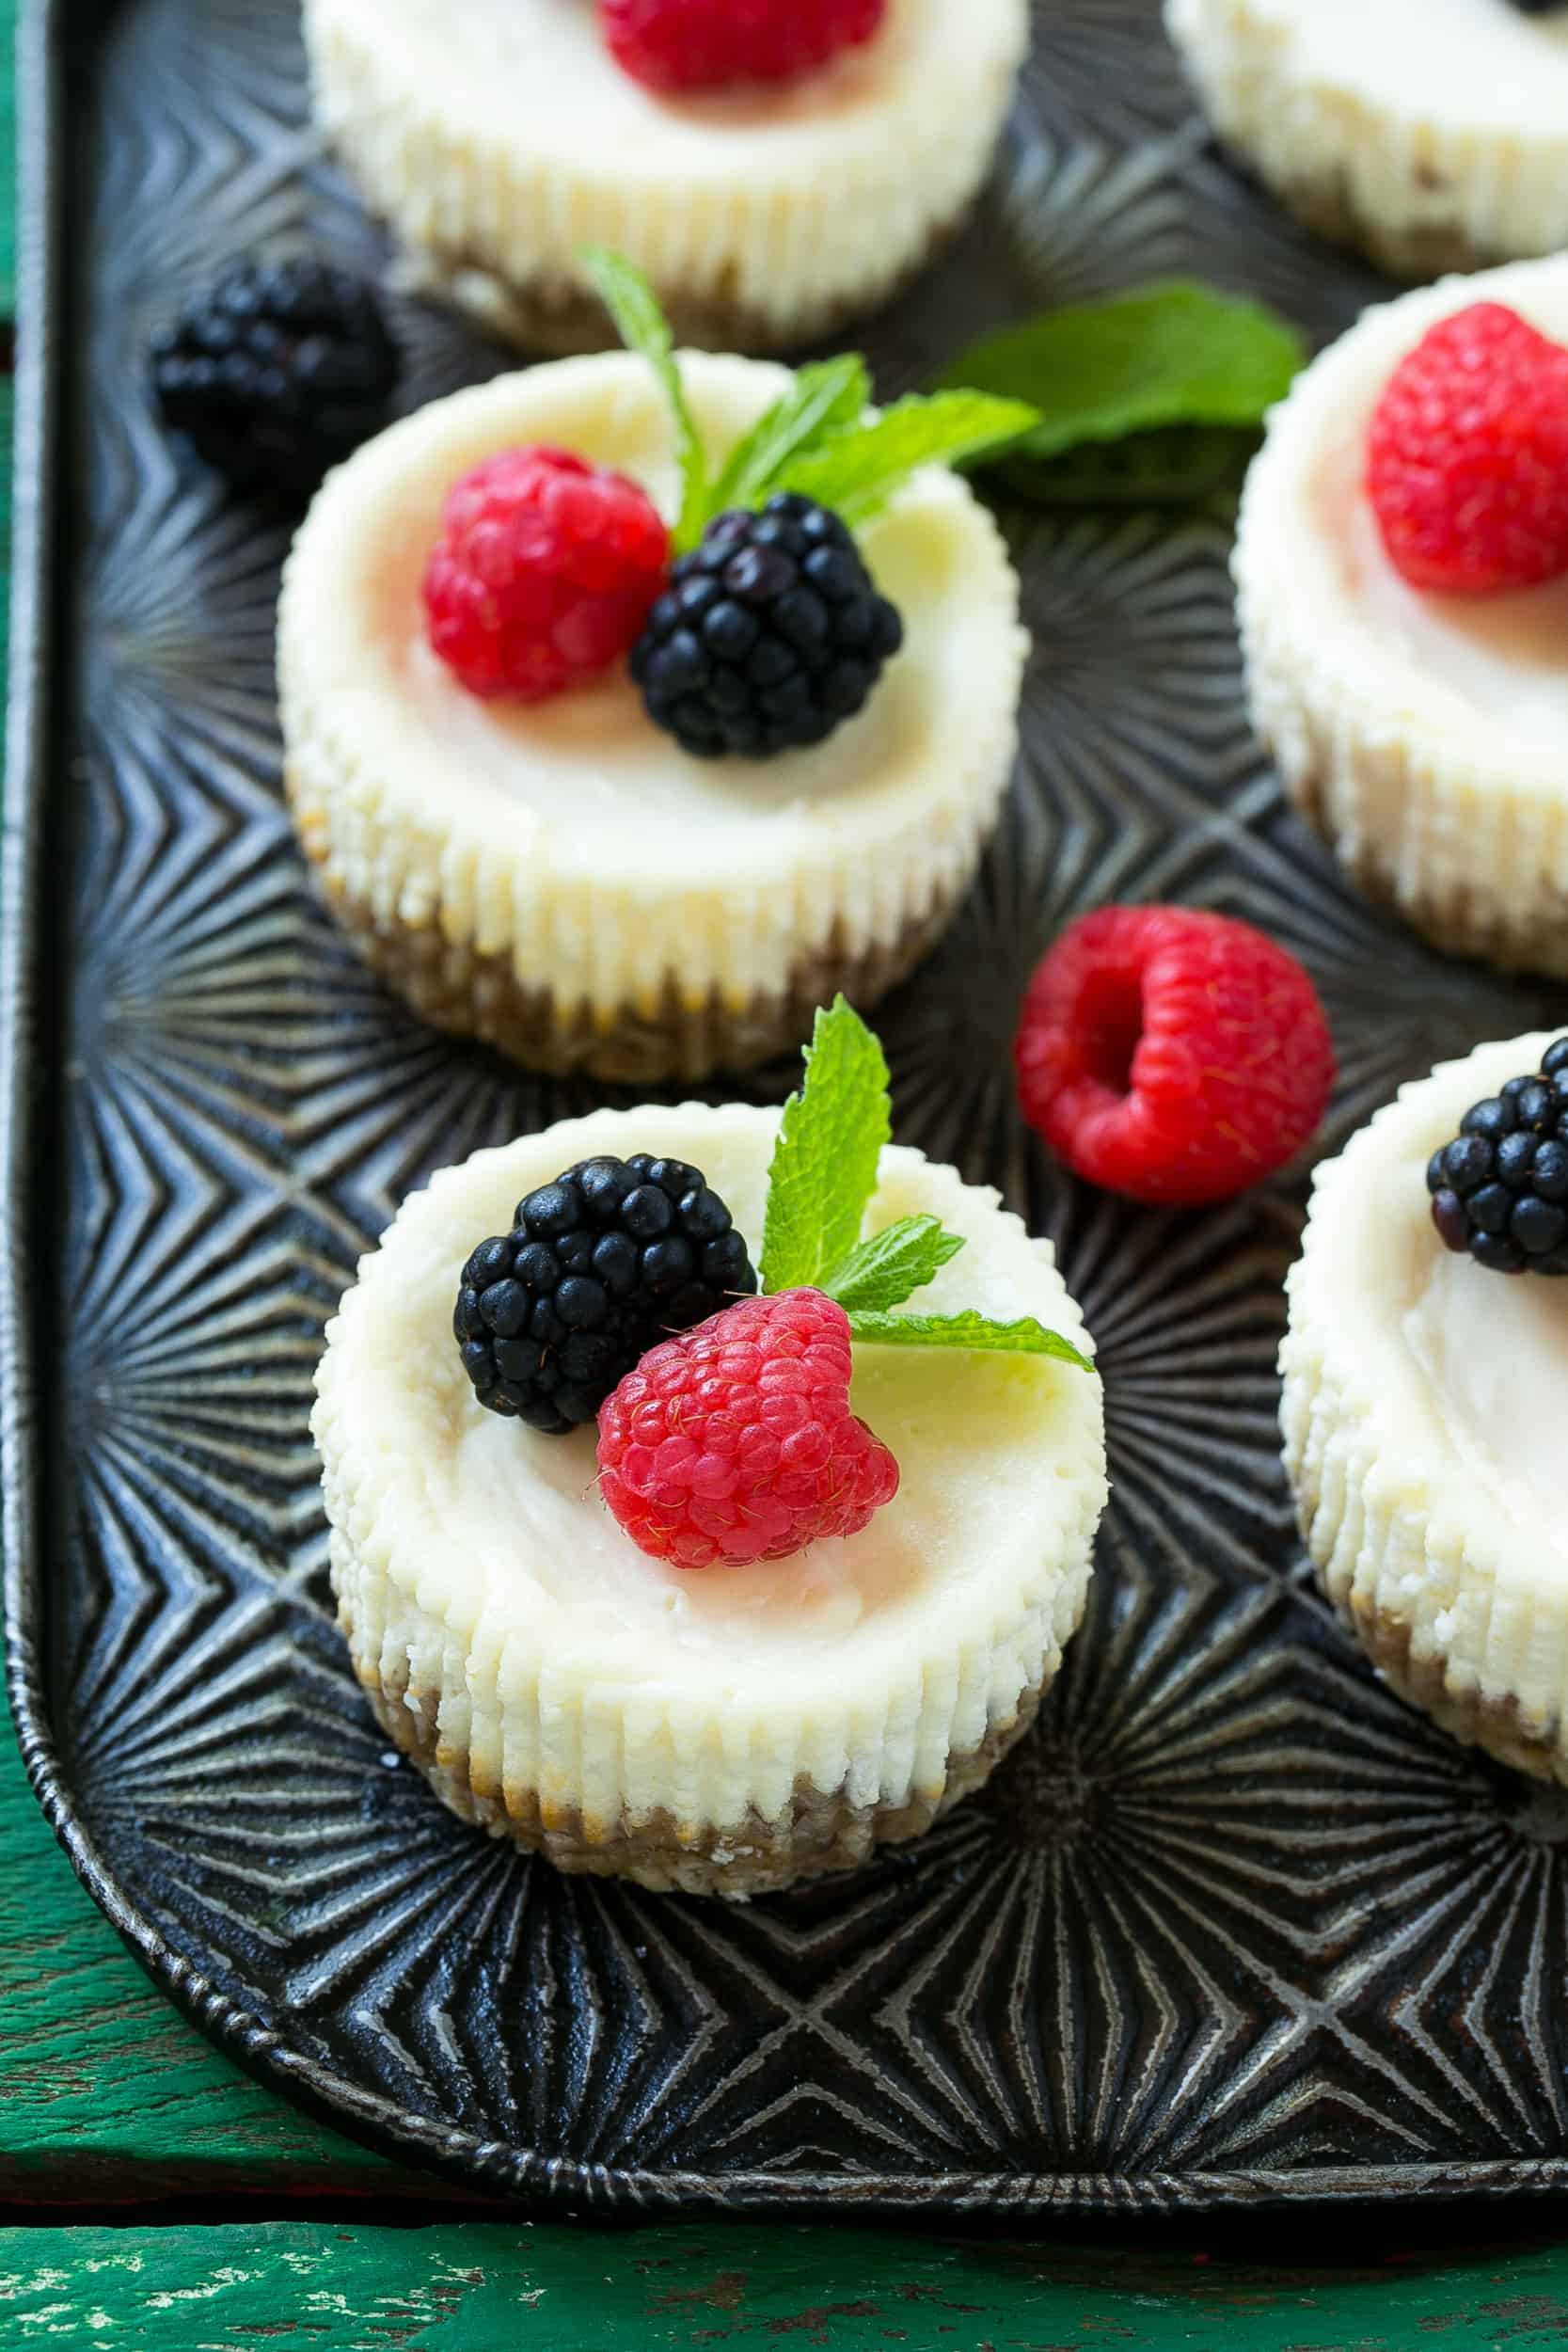  Cheesecake bites on a pan topped with berries and mint twigs